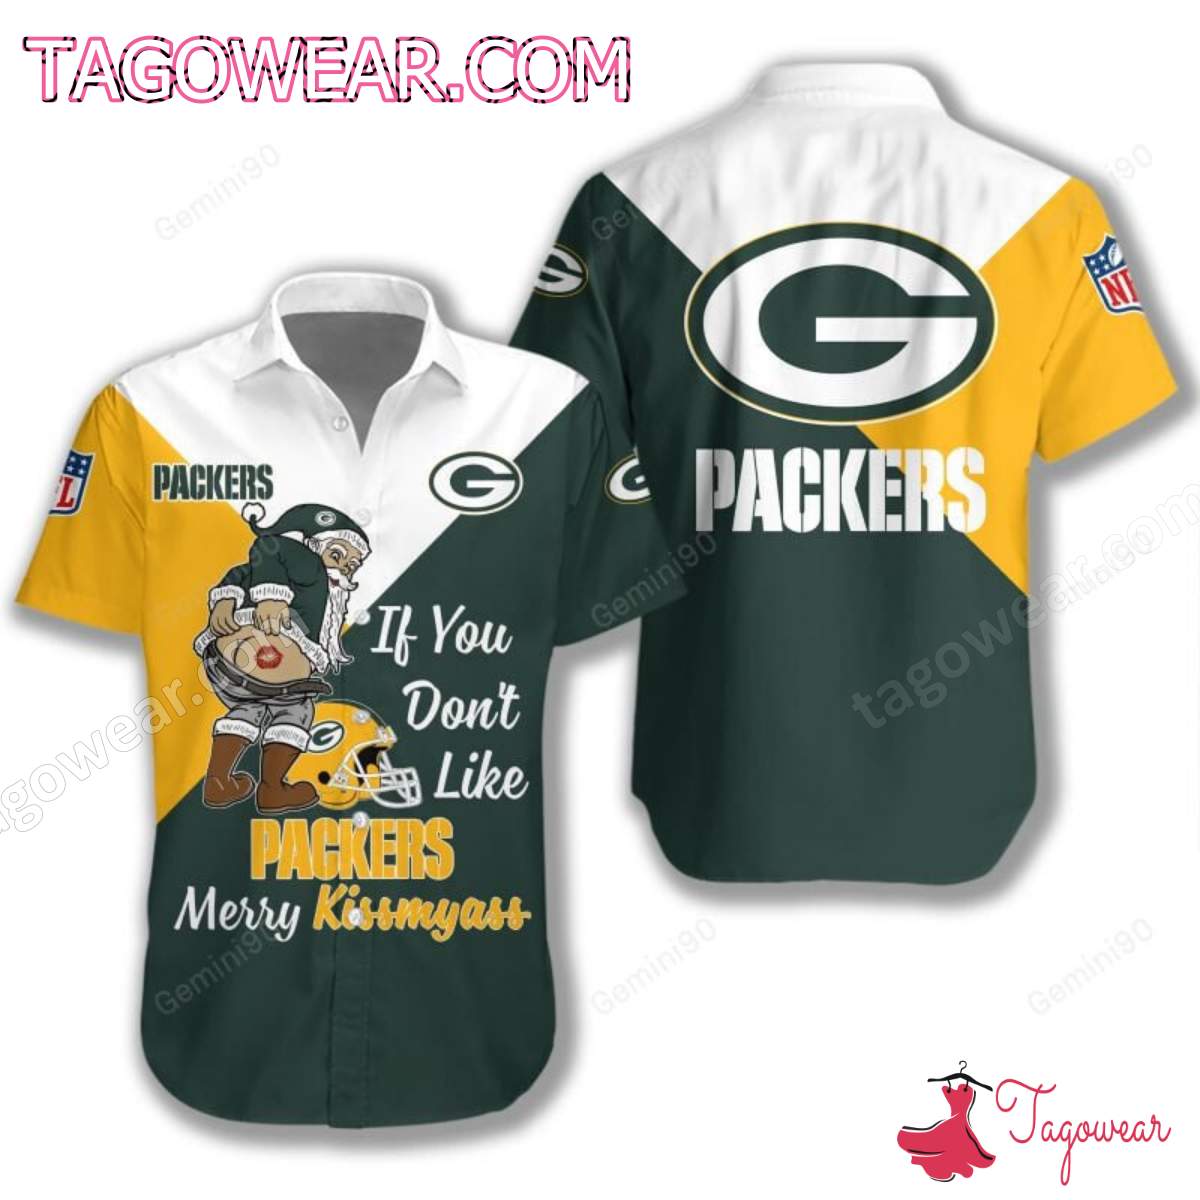 If You Don't Like Green Bay Packers Merry Kissmyass T-shirt, Polo, Hoodie a